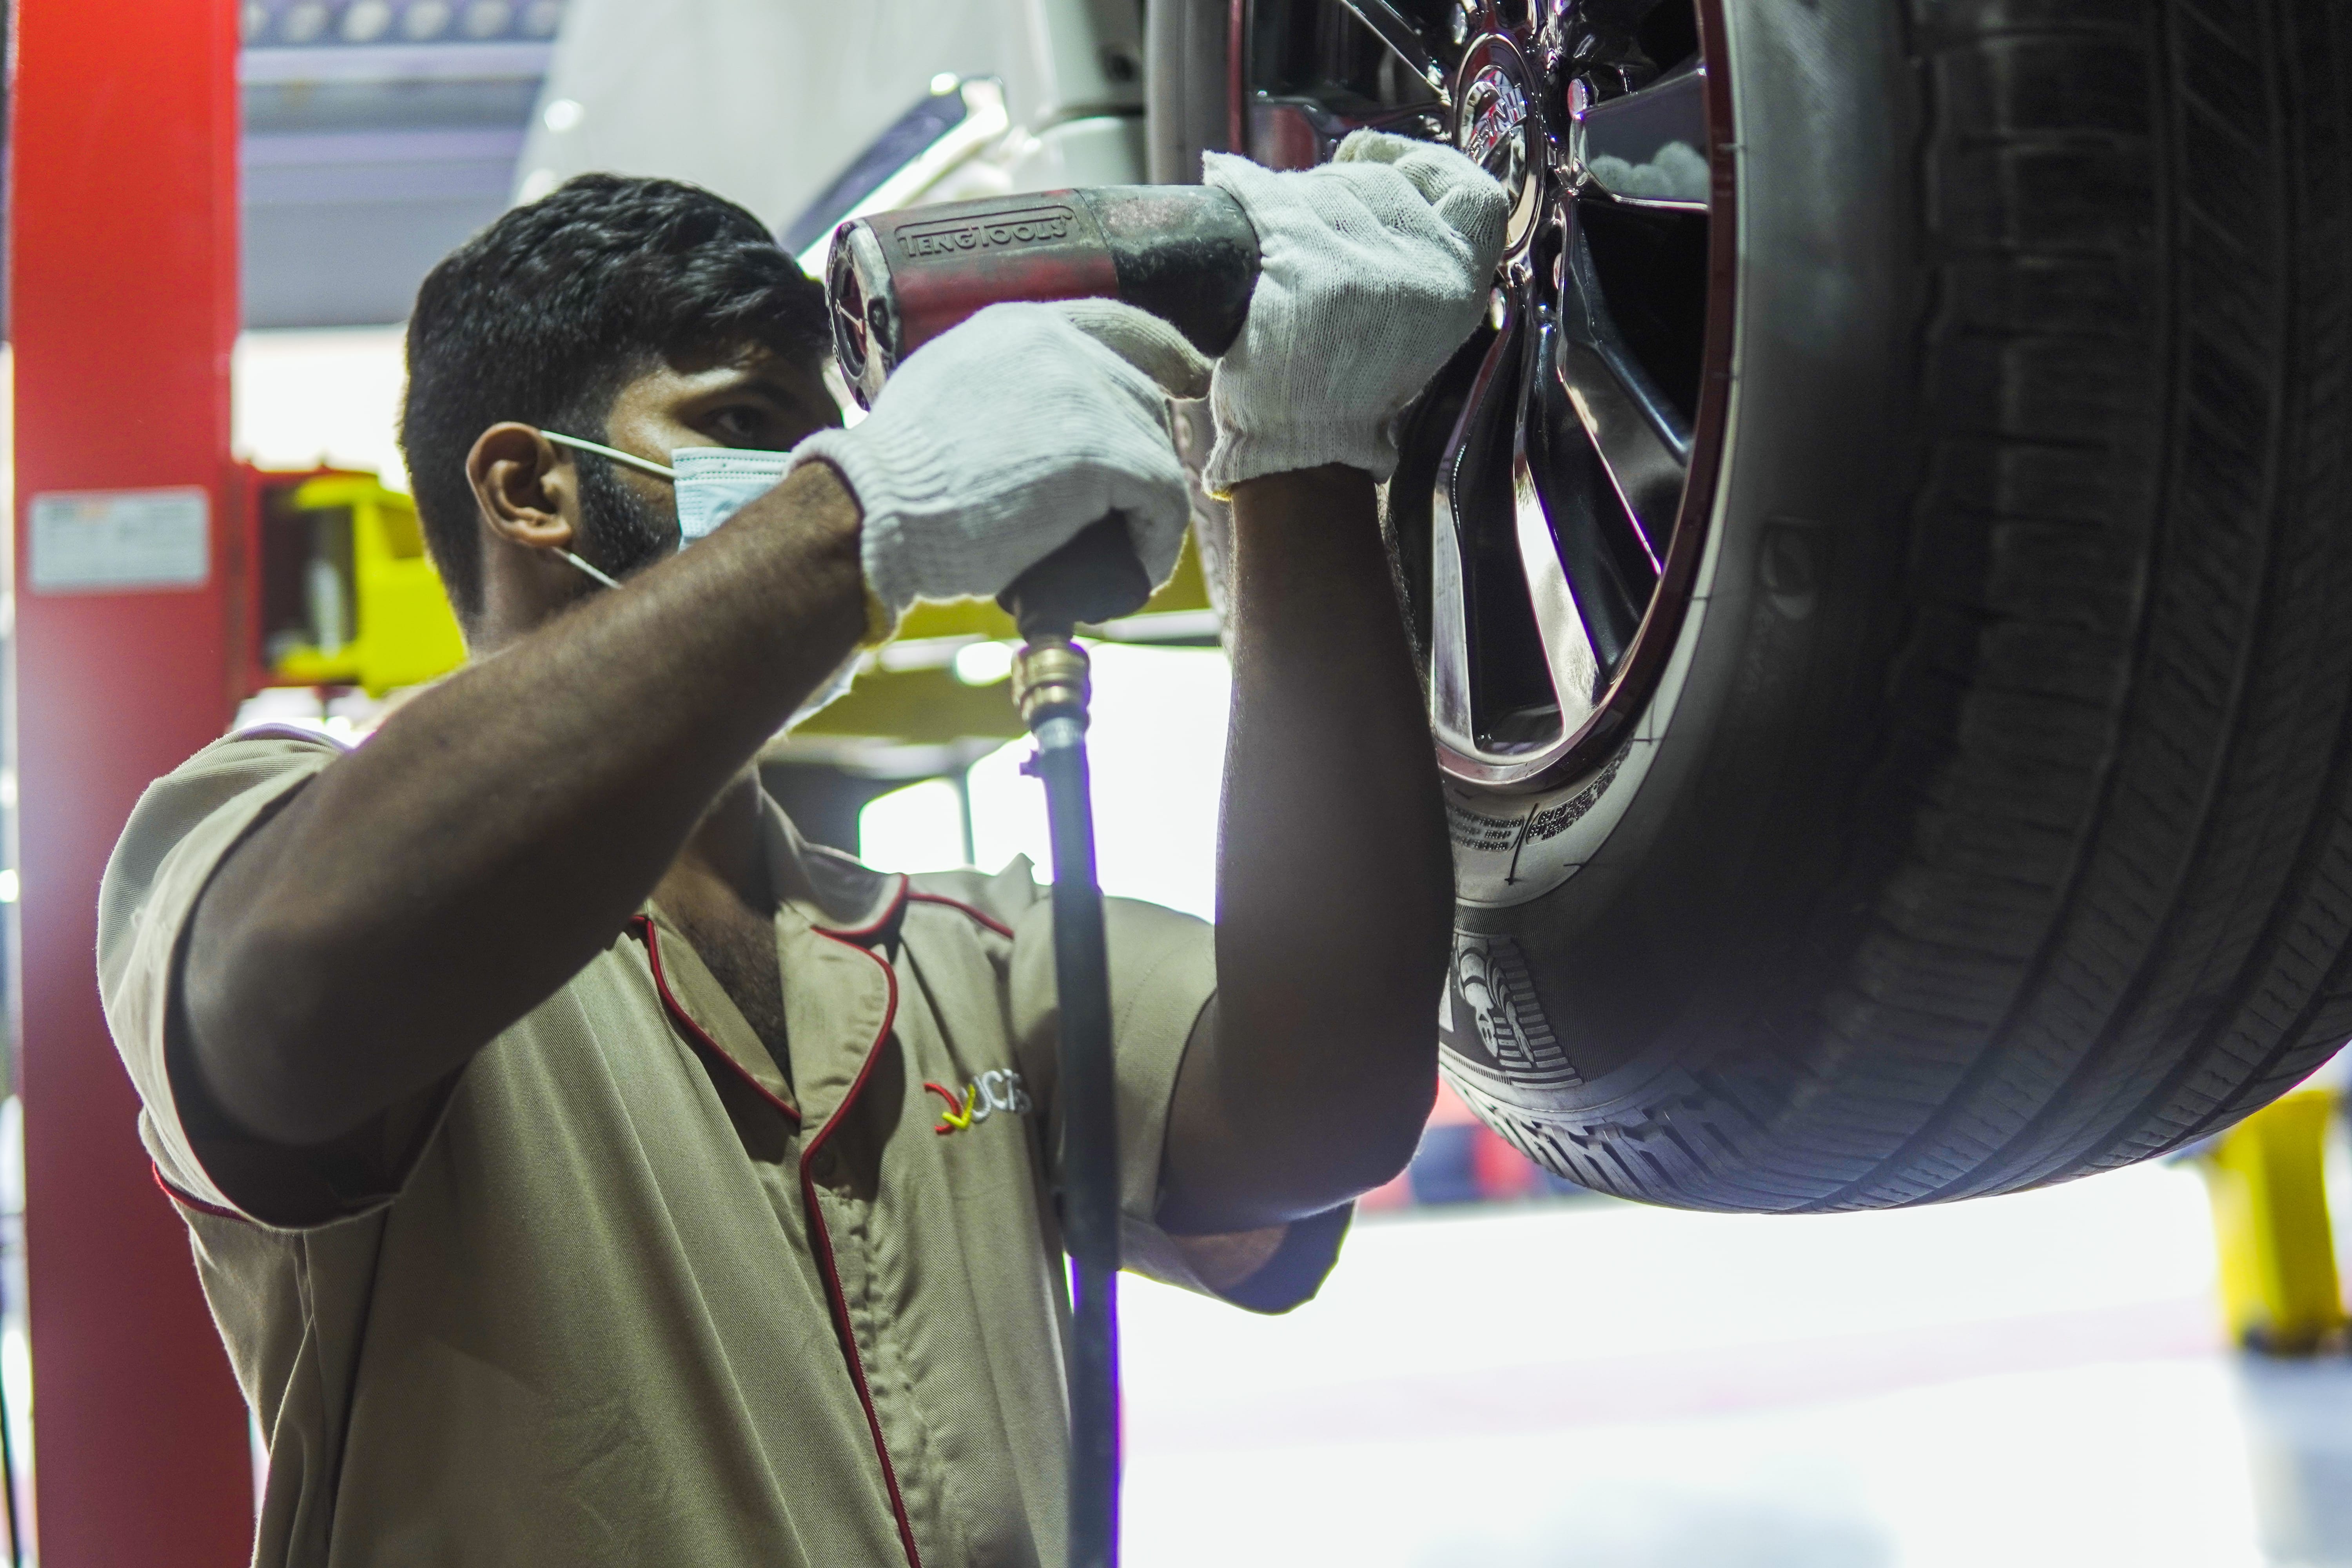 Why SNASH CarSME is the #1 Car Service and Repair in Dubai?